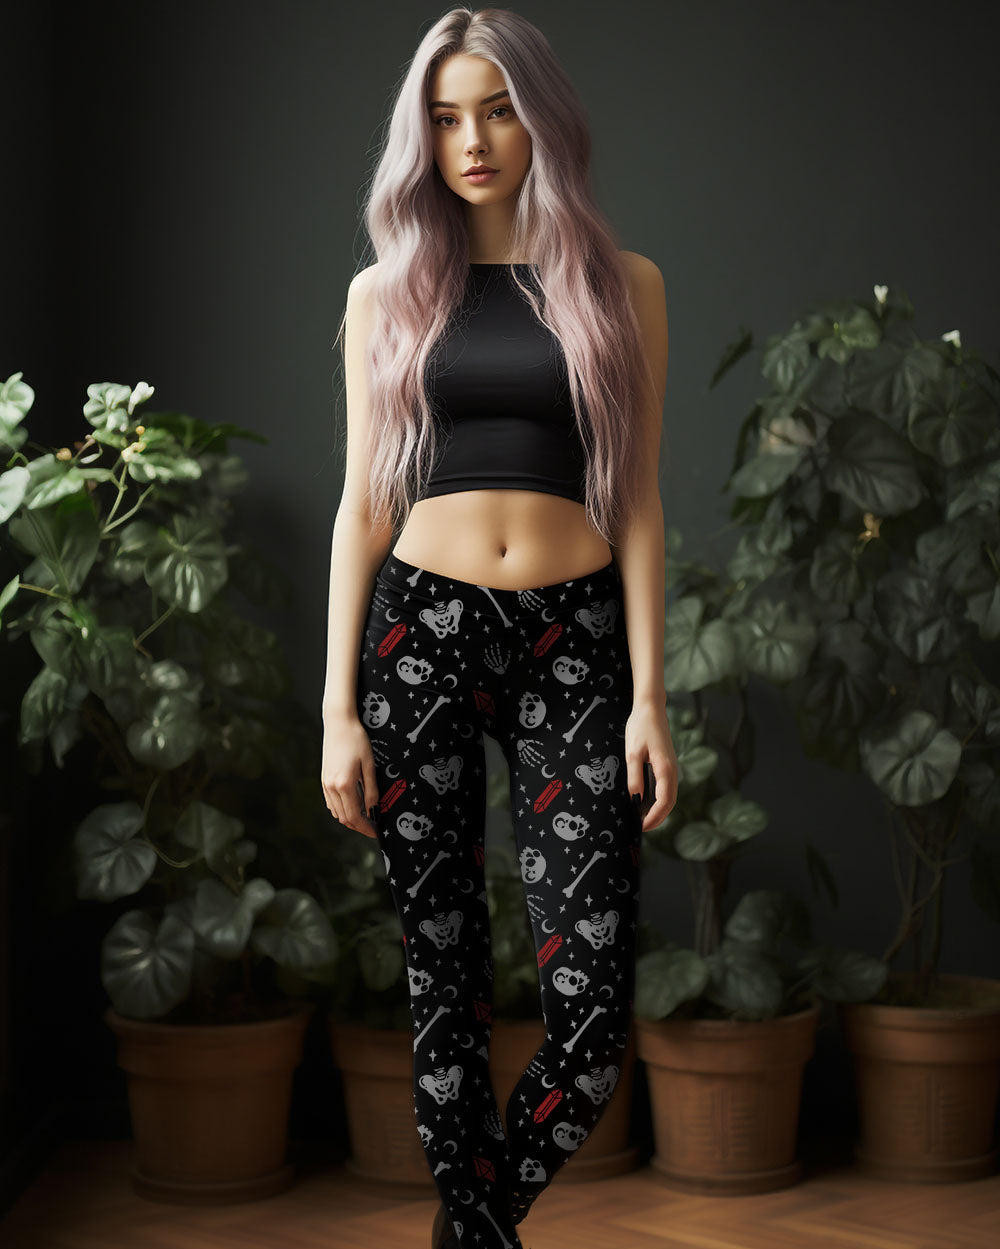 Elevate Your Style: Skull Leggings for Edgy Chic Vibes